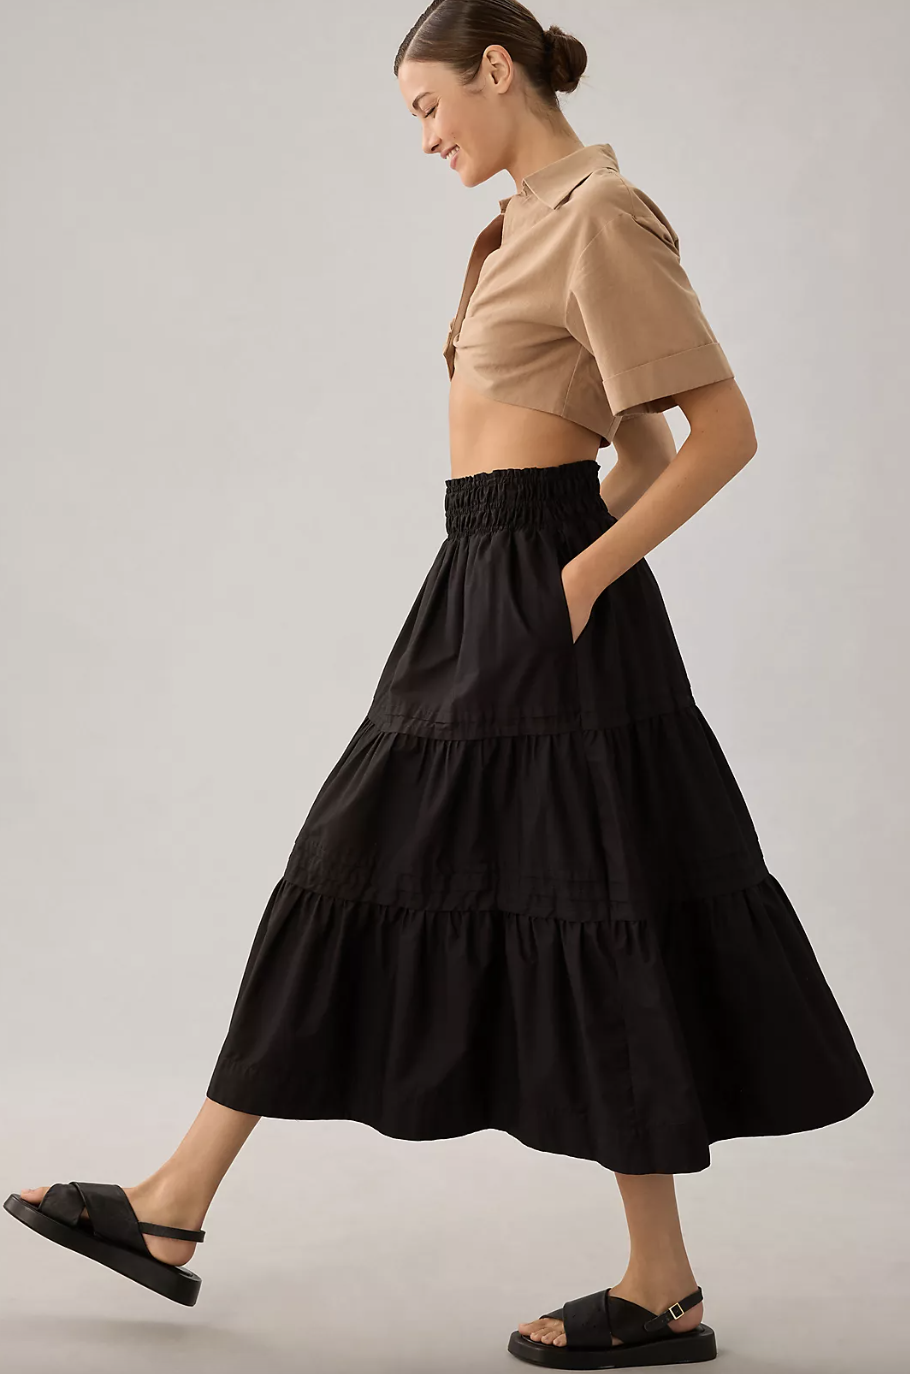 model wearing beige crop top, black shoes and The Somerset Maxi Skirt in black (photo via Anthropologie)